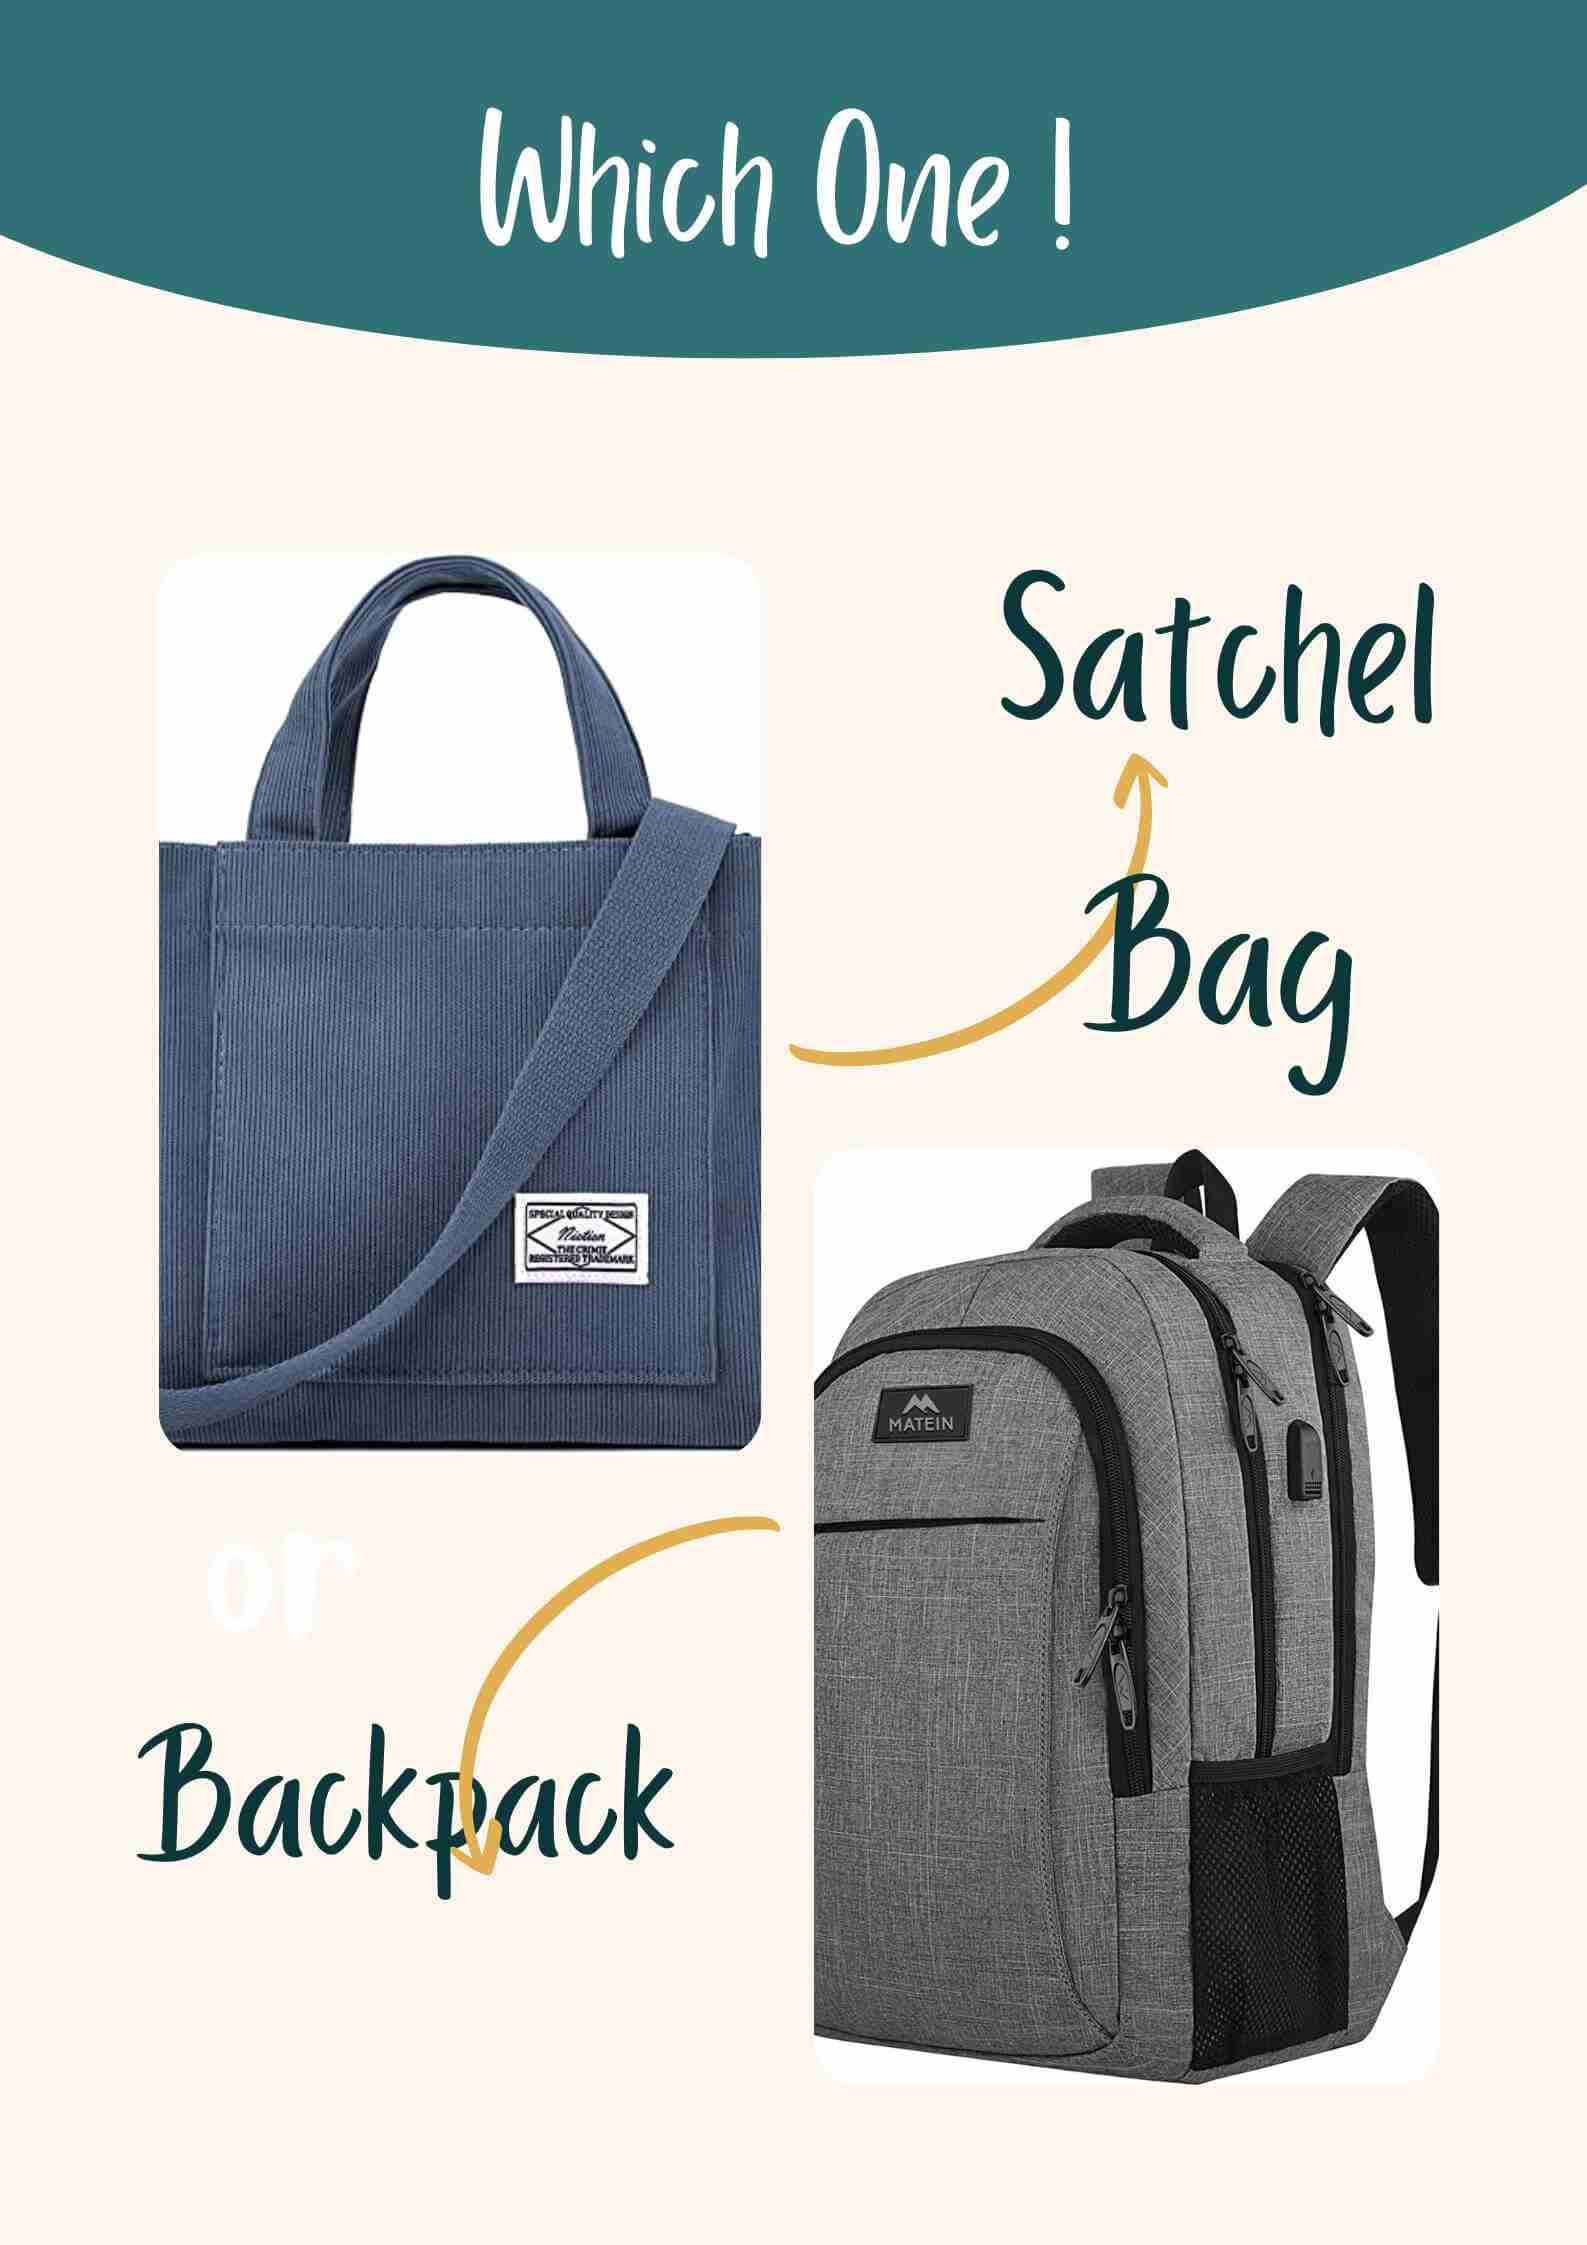 Satchel vs Crossbody Bag - 4 Differences You Didn't Know